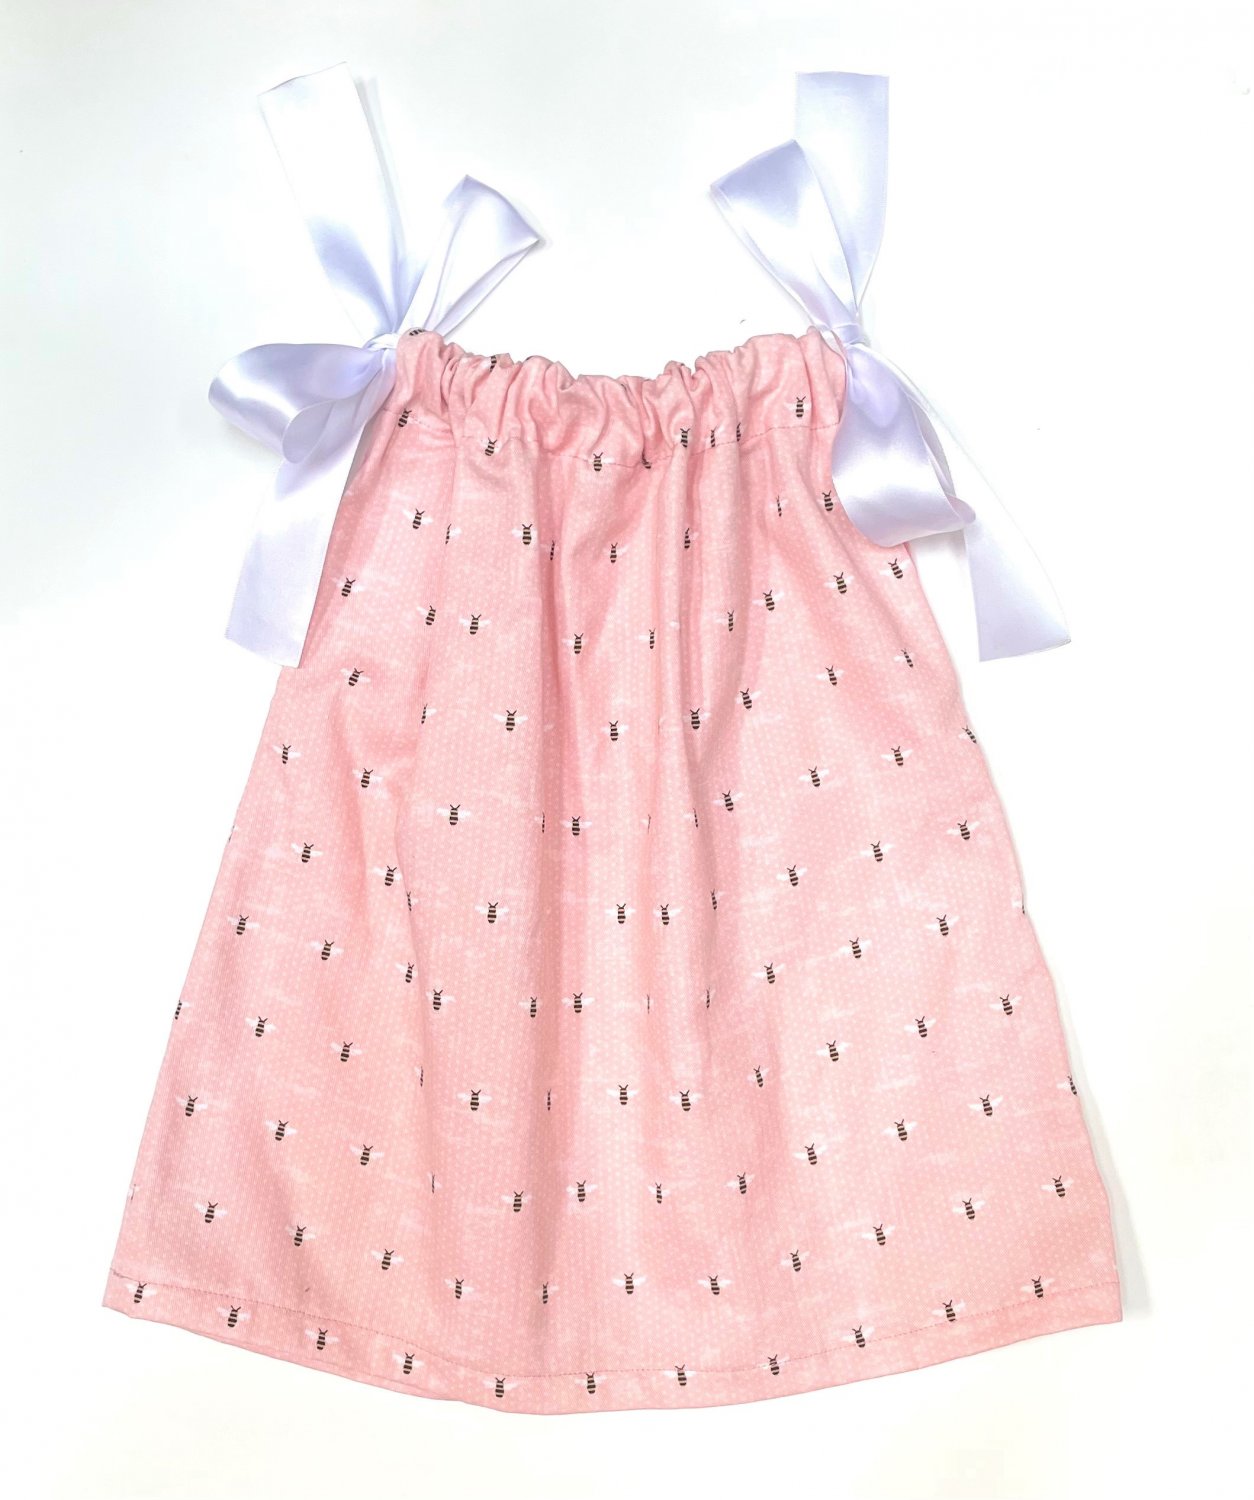 BLUSH BEES with WHITE Ribbon- Handmade Infant Toddler Dress/Blouse  SIZE: 12-18MO